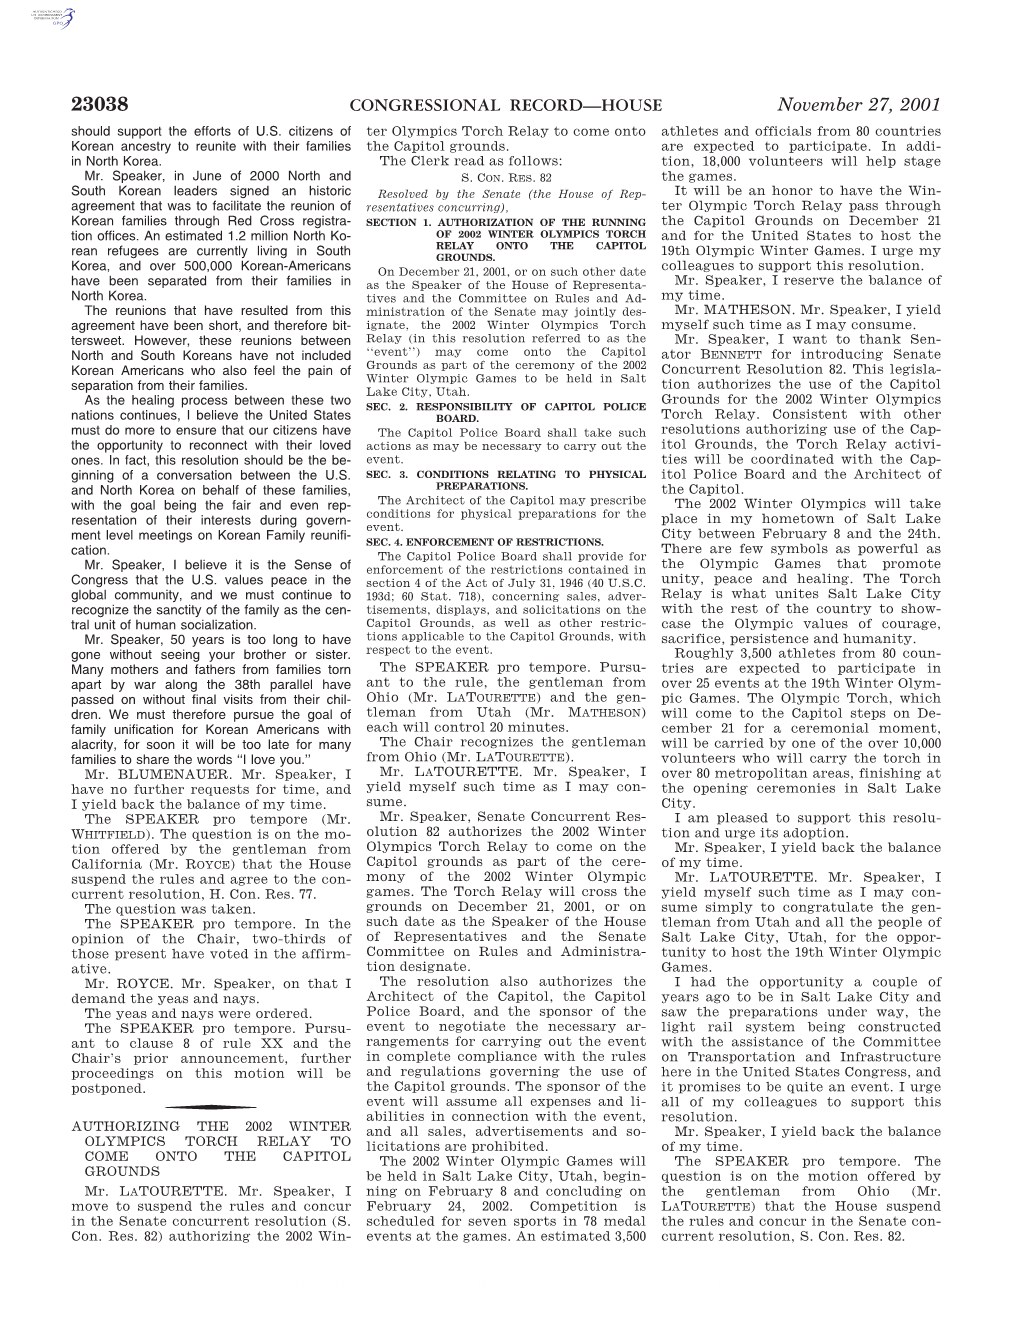 CONGRESSIONAL RECORD—HOUSE November 27, 2001 Should Support the Efforts of U.S